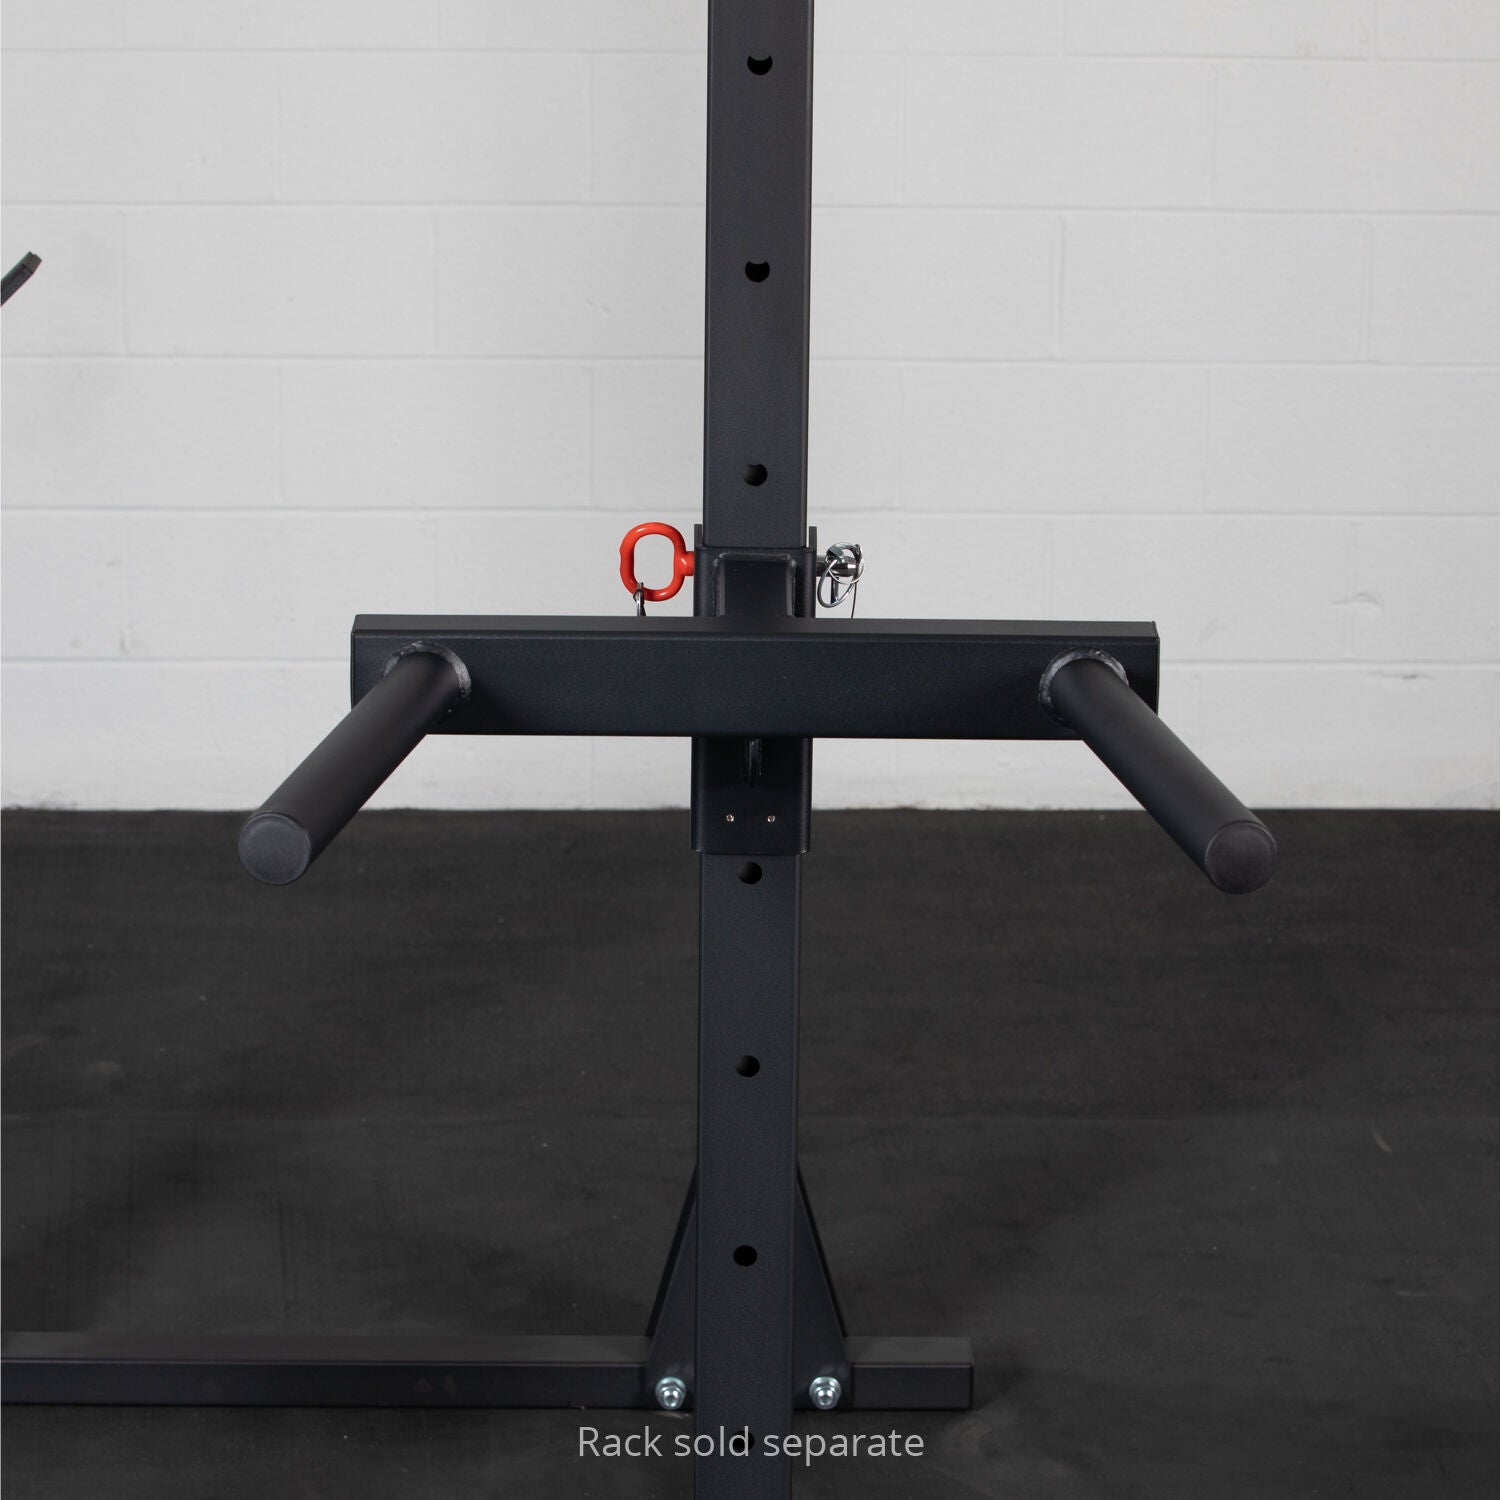 A black, sturdy Titan Fitness X-3 Series Y-Dip attachment with padded grips, highlighting a red lock, is mounted on a vertical post with a noticeable label indicating 'rack sold separately', set against